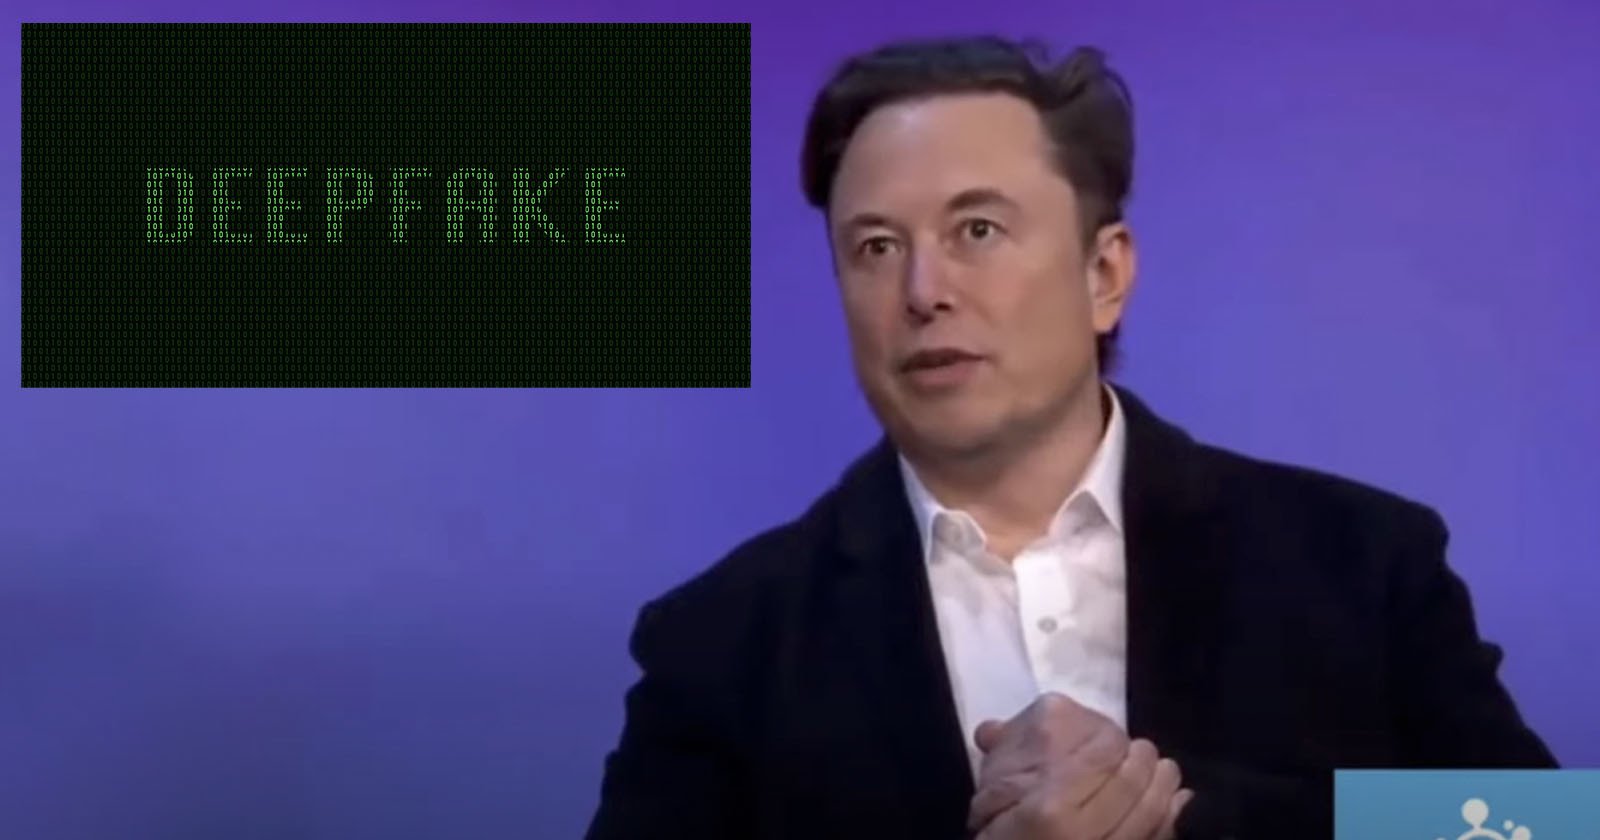  deep faked elon musk scamming people youtube 